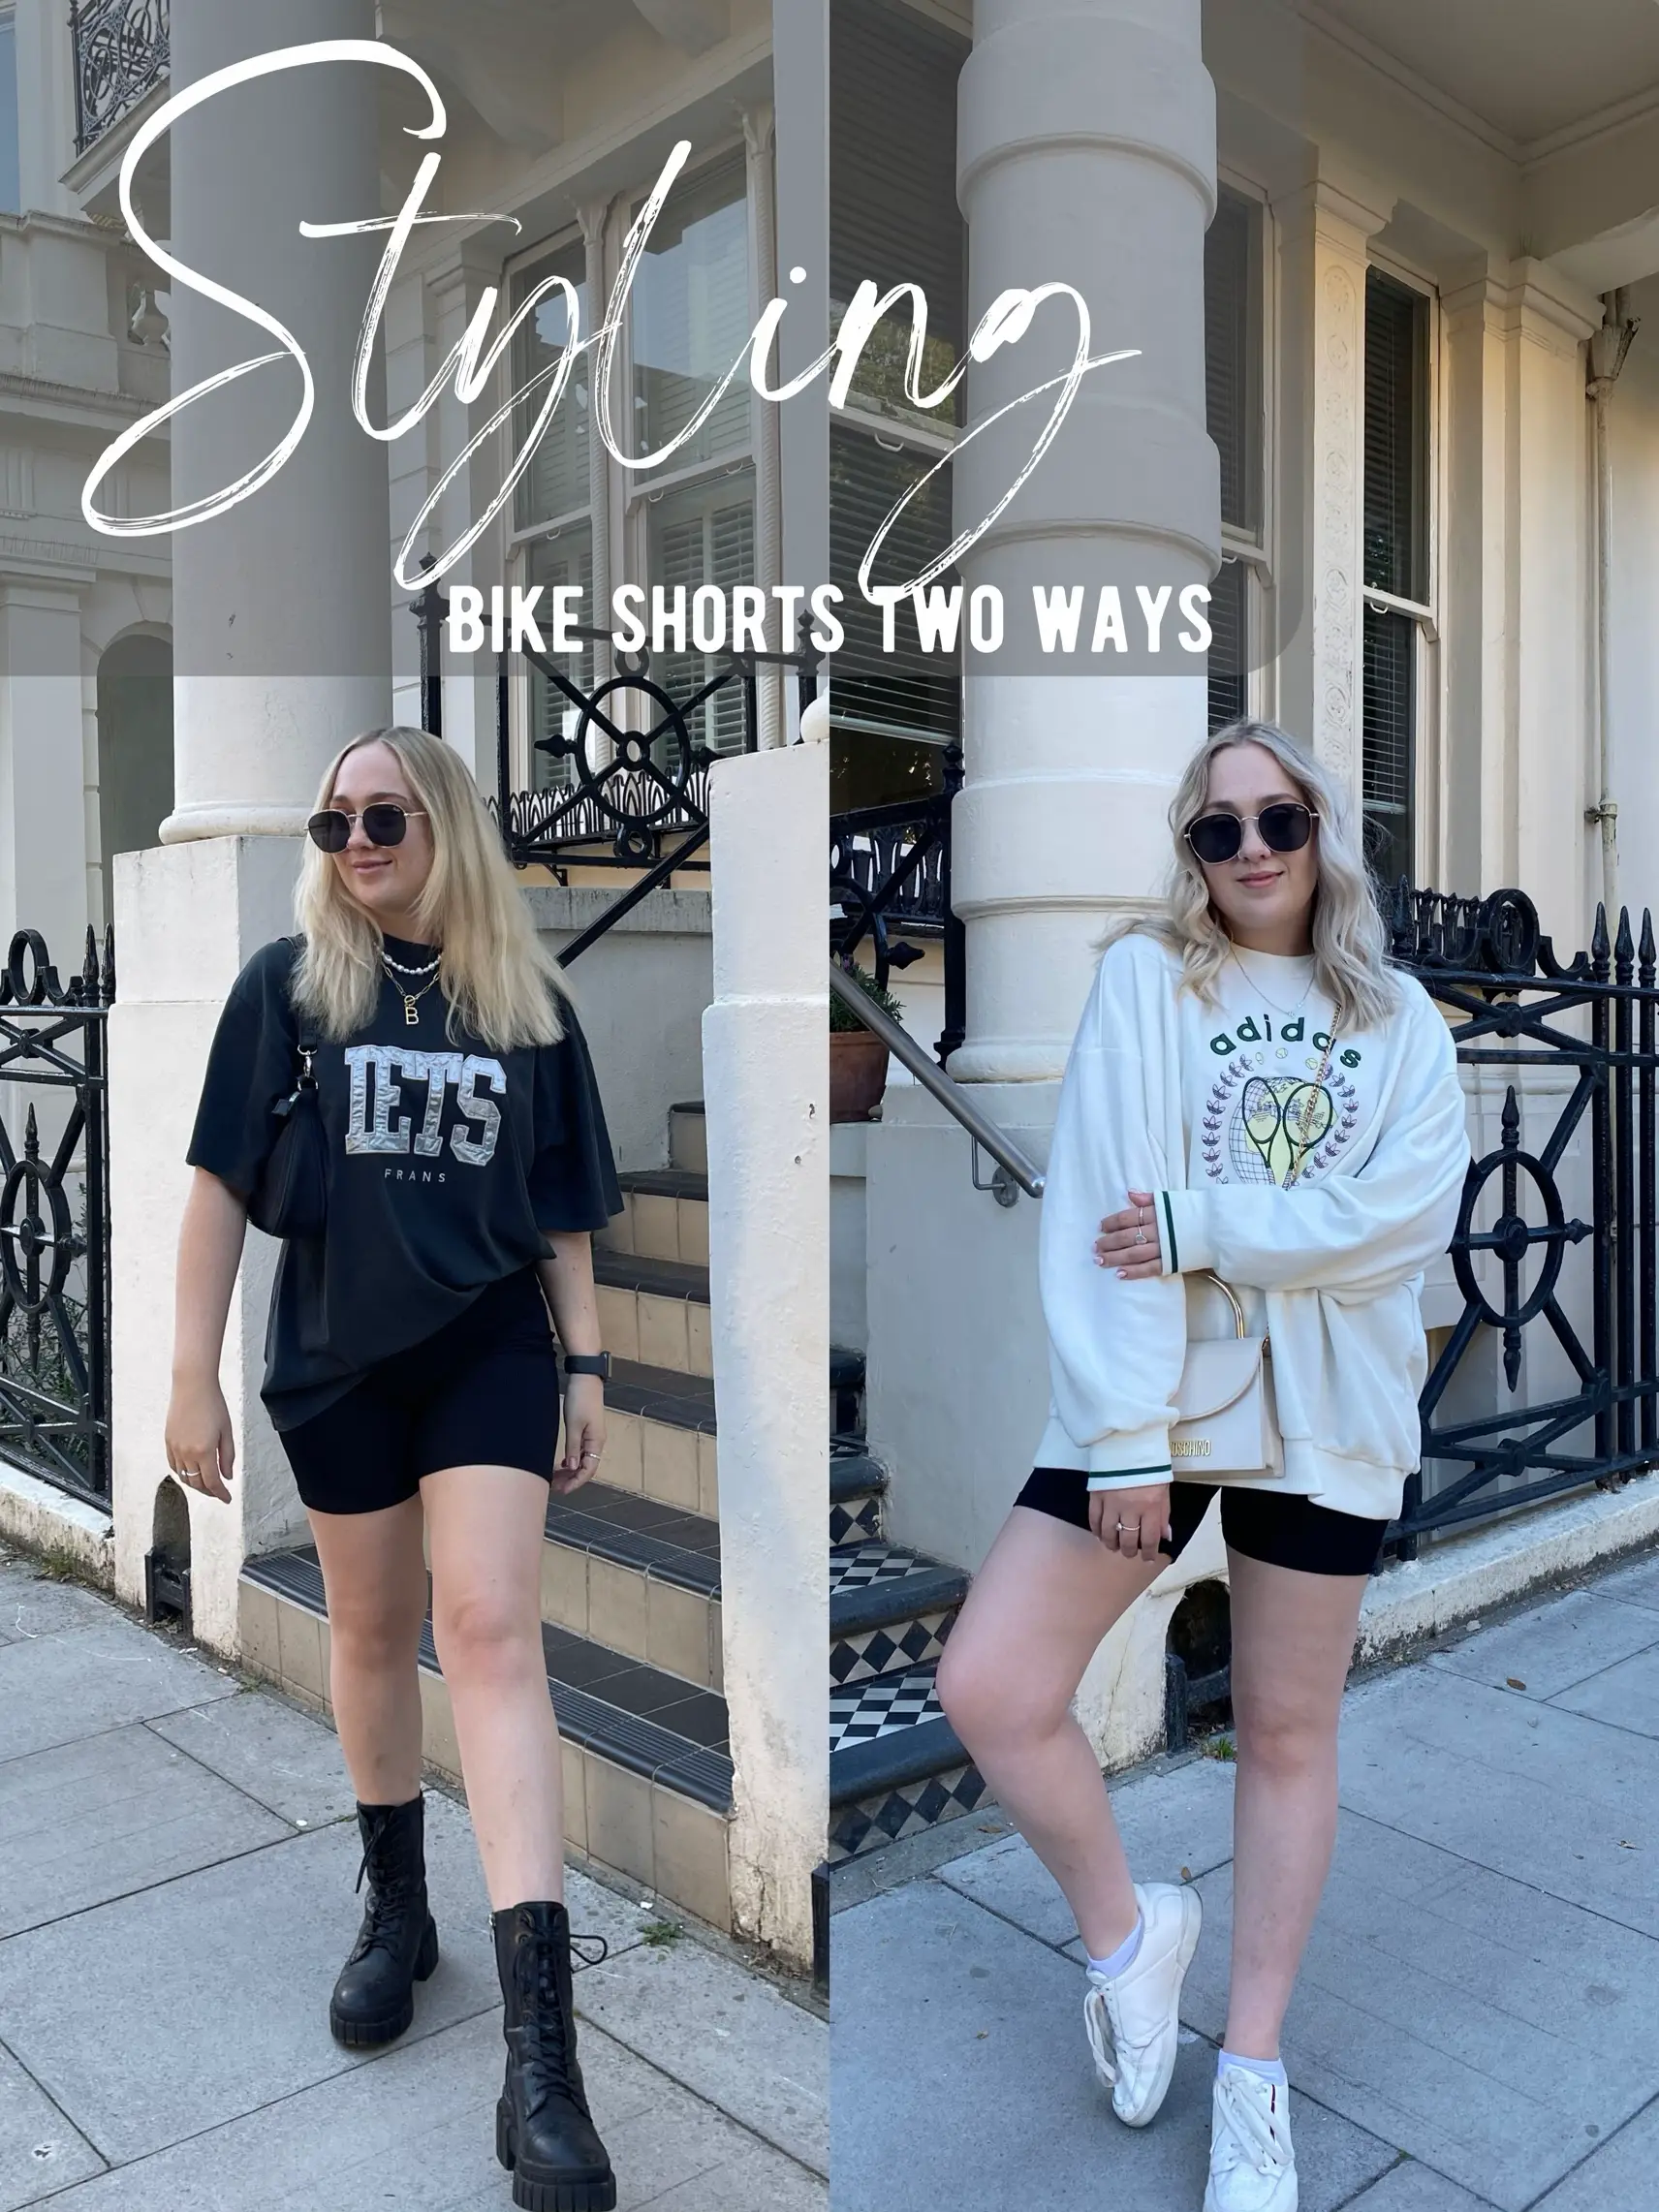 Styling Bike shorts two ways - look book 🖤